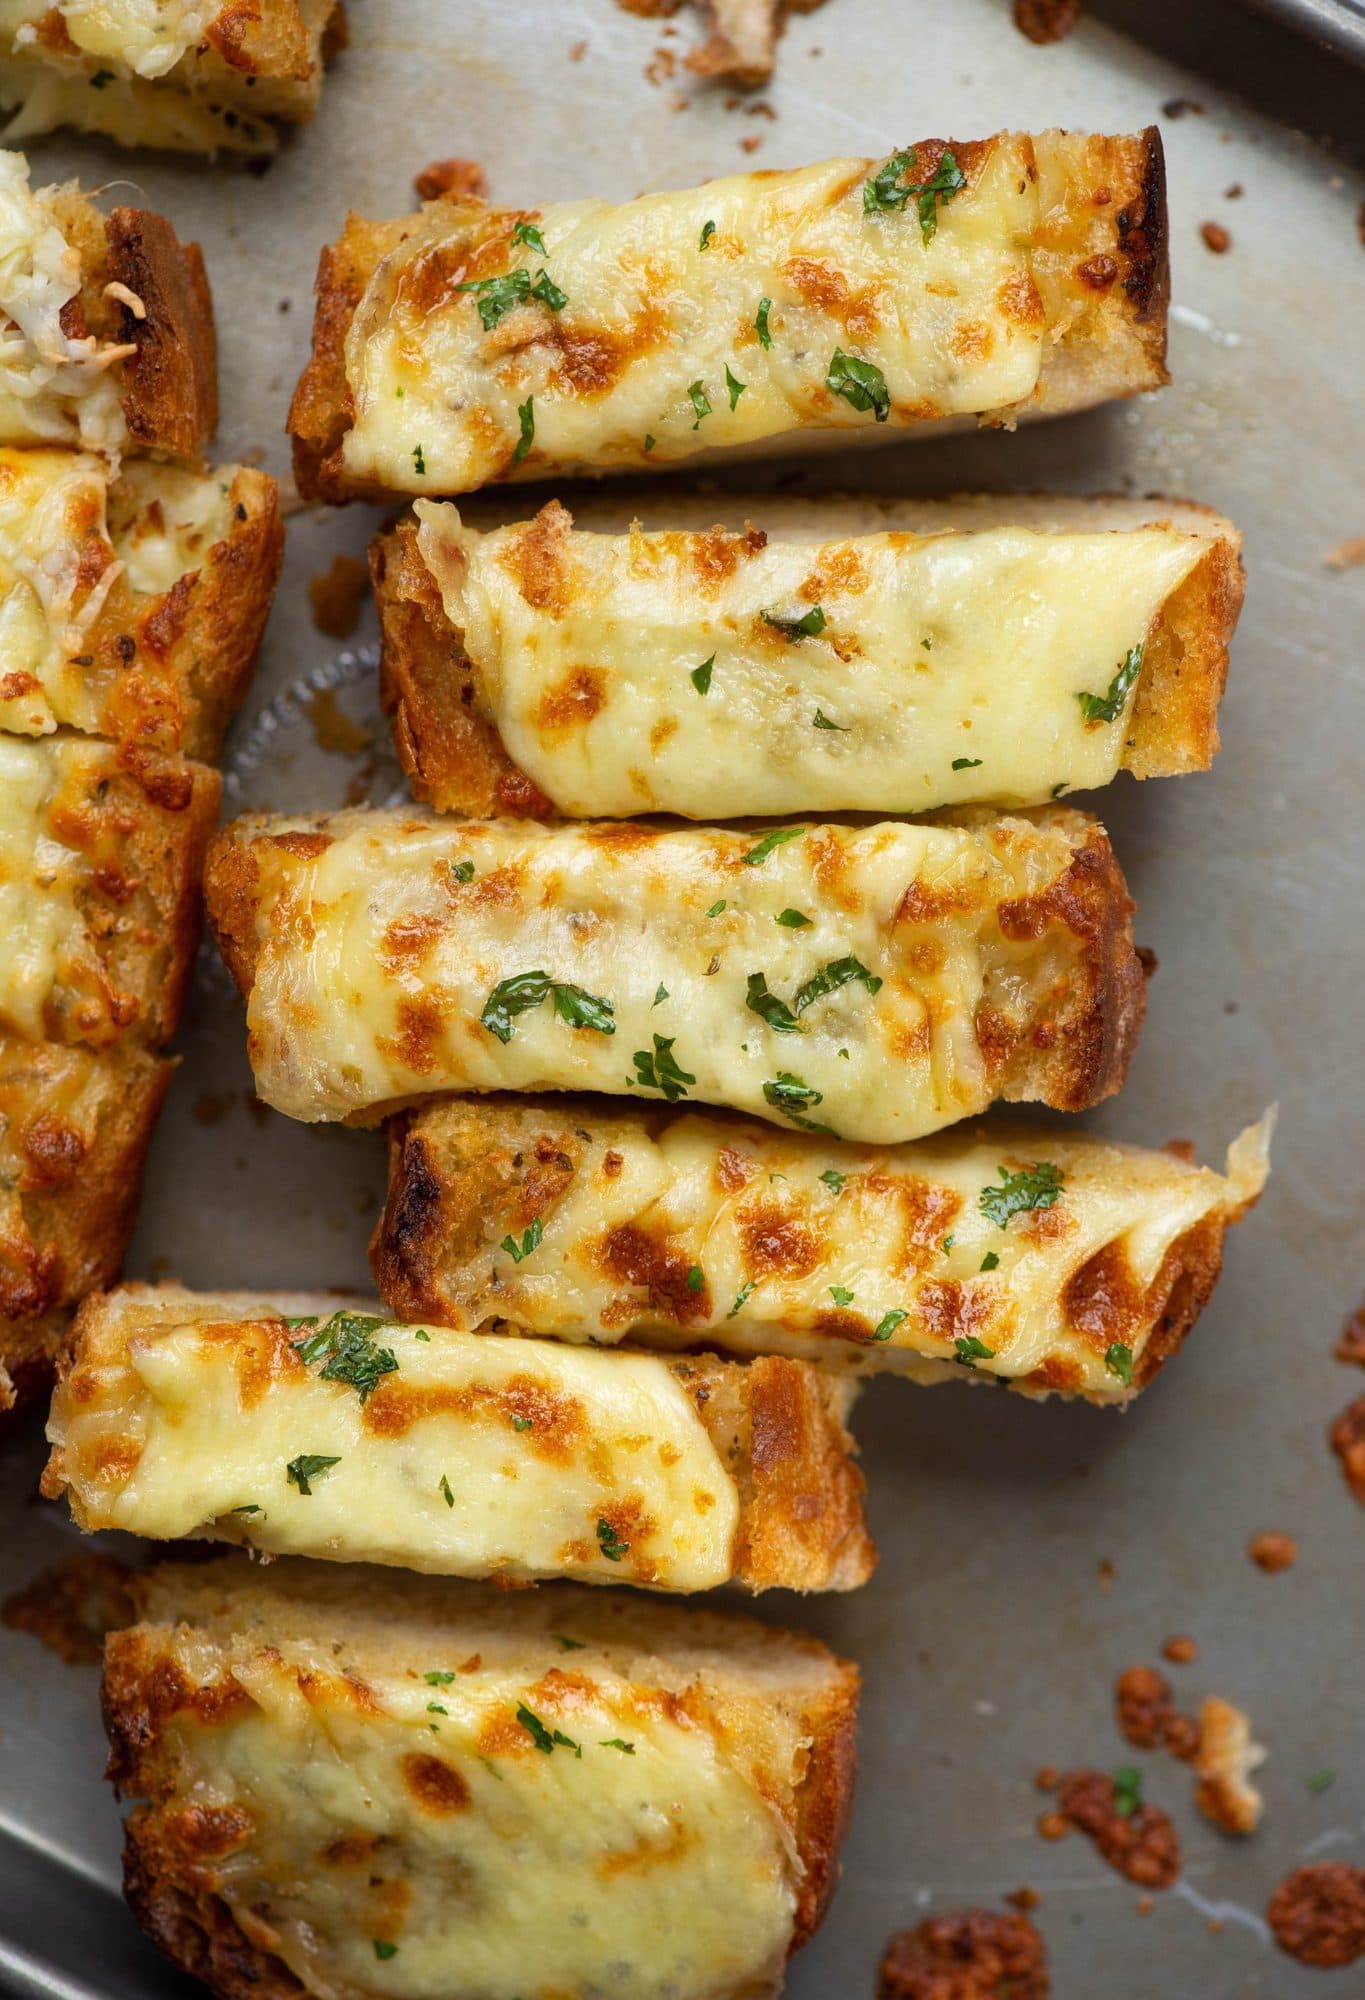 This recipe is the quickest and easiest way to make Garlic Bread. Cheesy, garlic-y deliciousness with crunchy edges is perfect to pair with pasta, dunk into soups, or serve as a side dish. 
